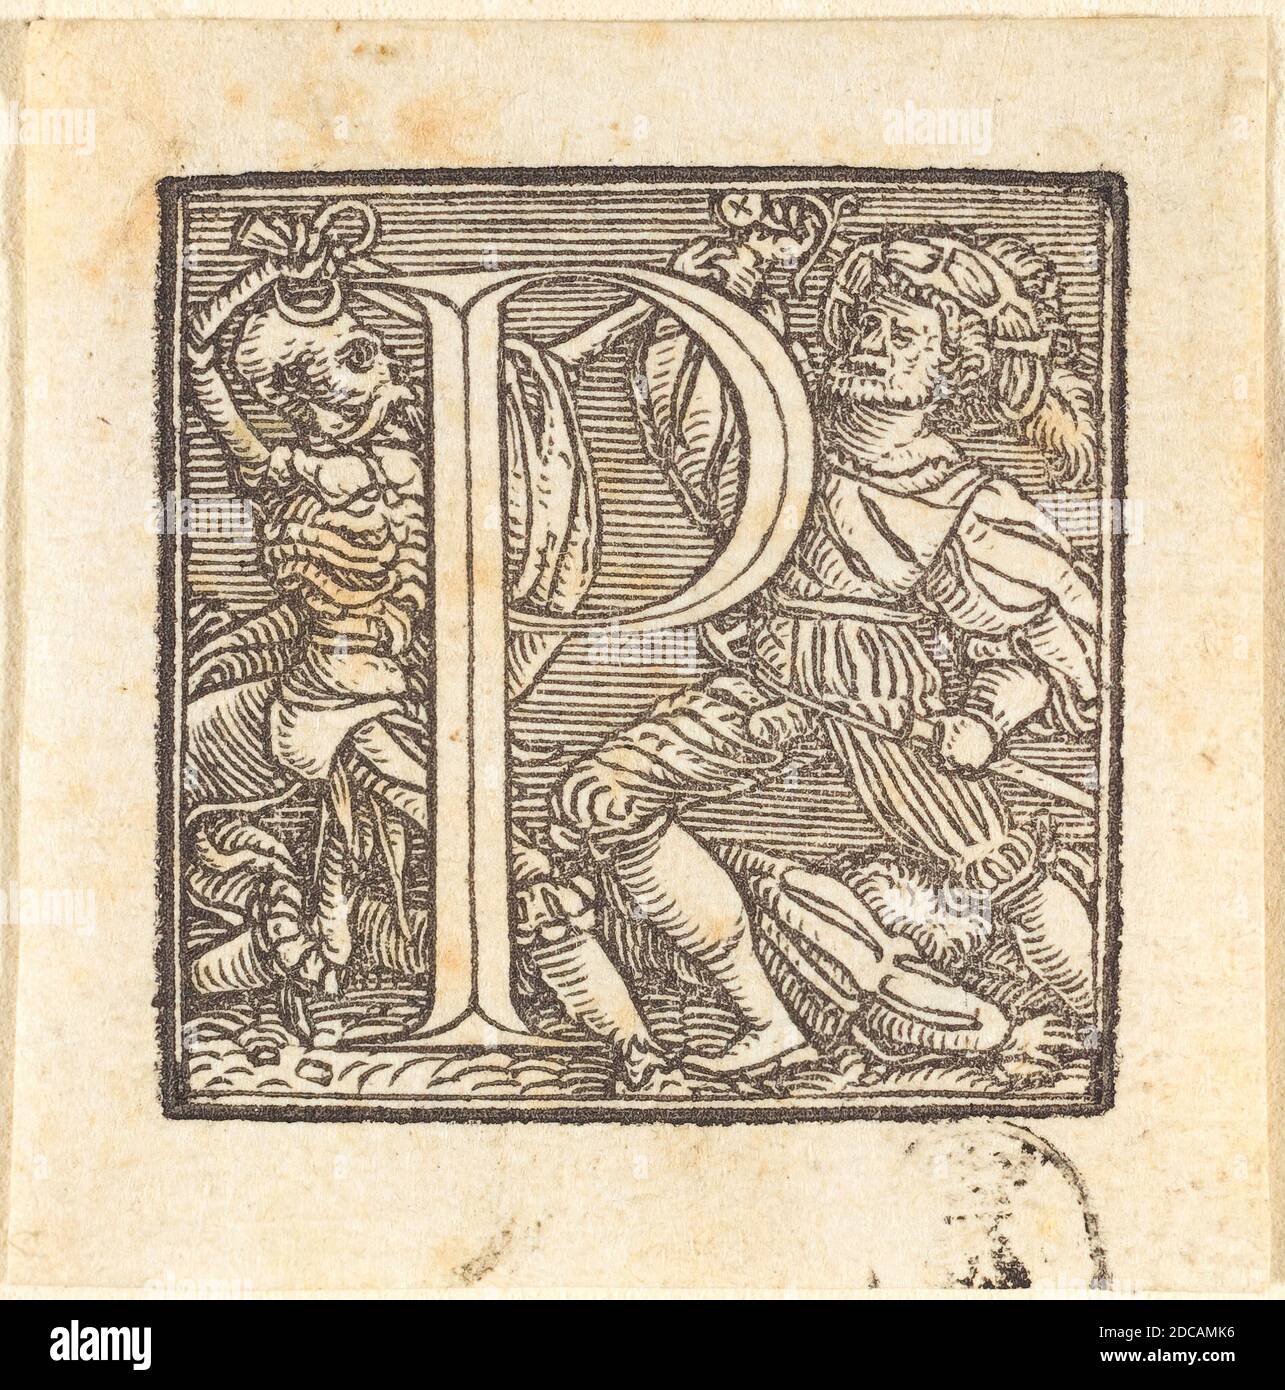 Hans Holbein the Younger, (artist), German, 1497/1498 - 1543, Letter P, Alphabet of Death, (series), woodcut Stock Photo